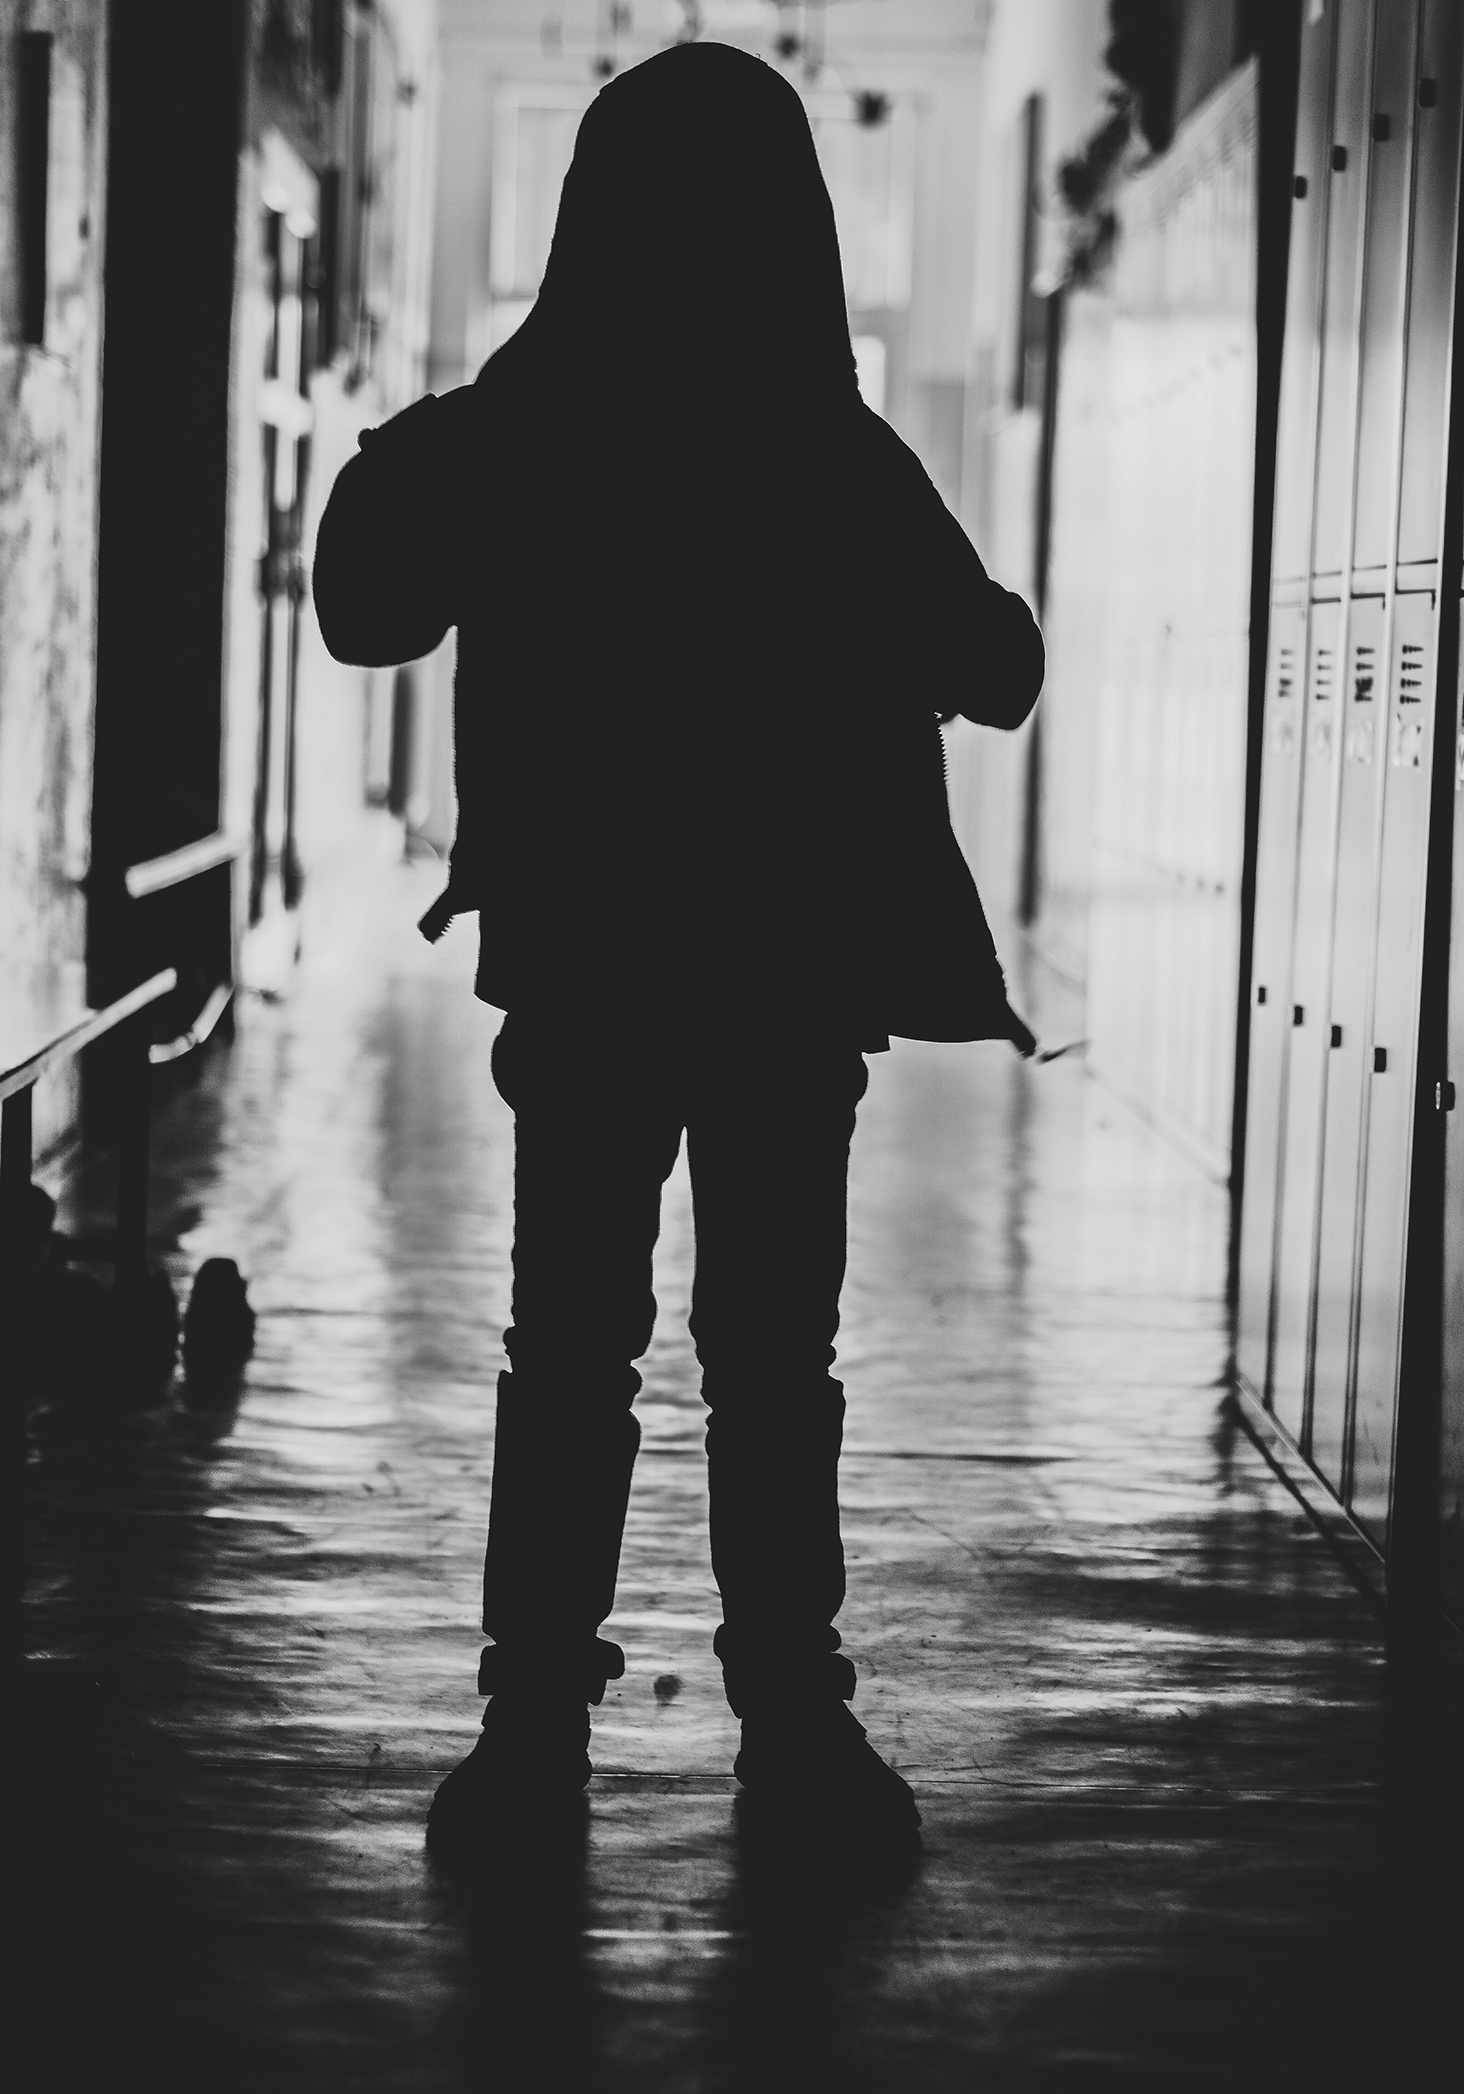 A young child standing alone in a school hallway, wearing a sweater and cast completely in a black silhouette